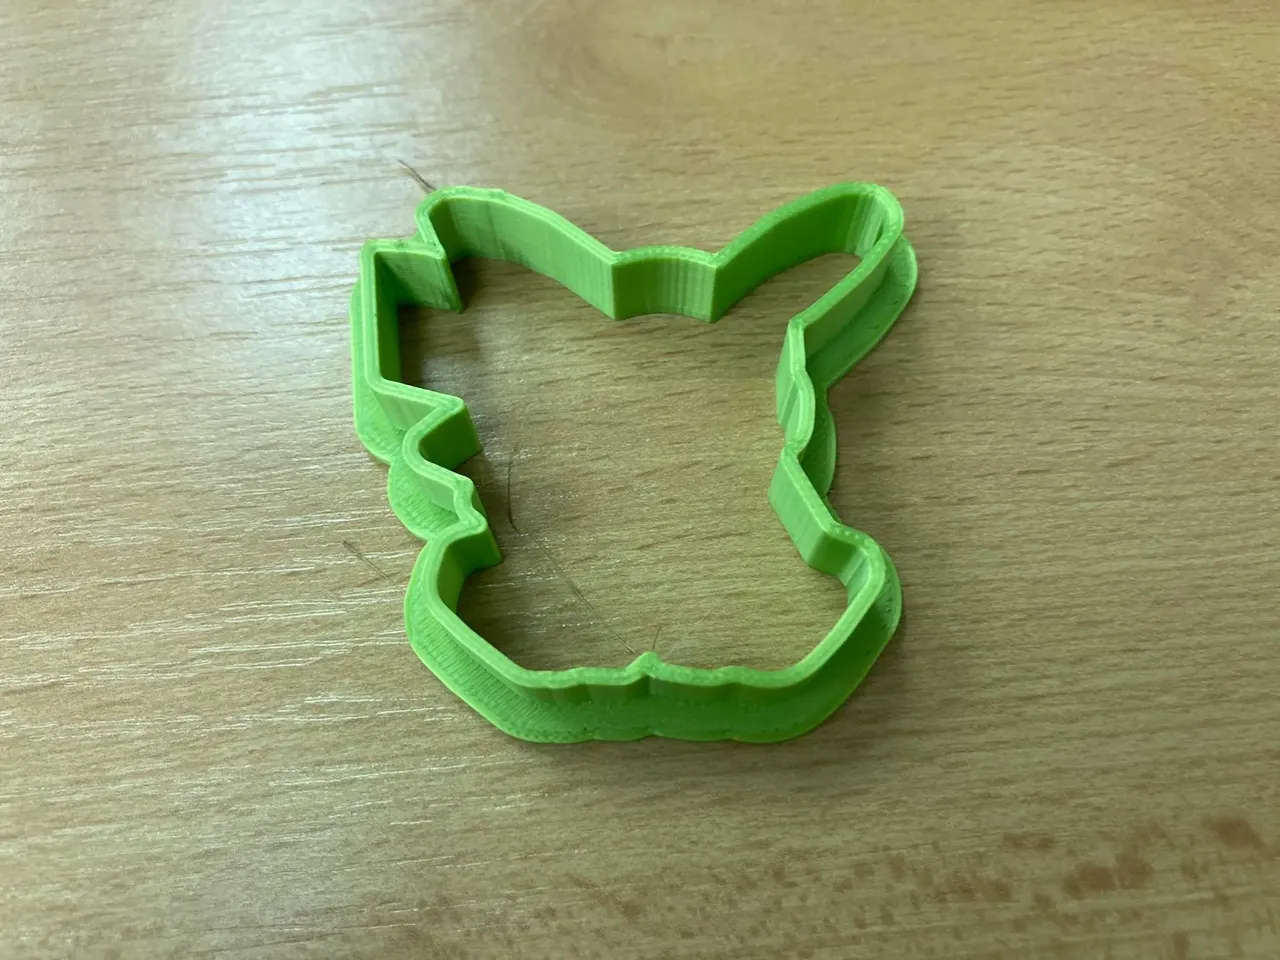 Harry Potter cookie cutter by rstastny